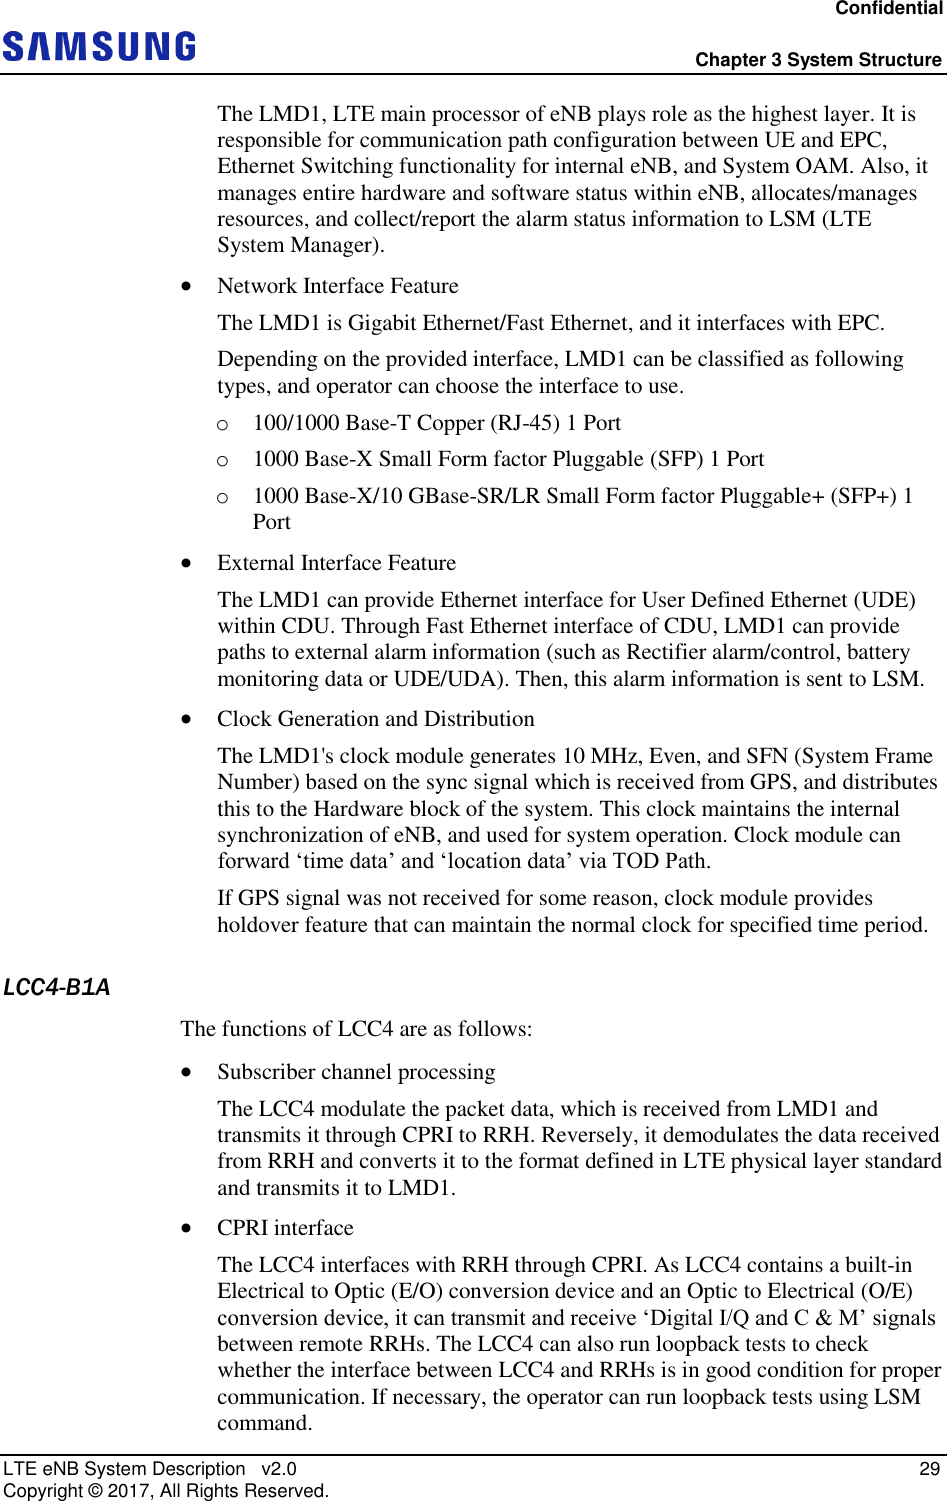 Confidential  Chapter 3 System Structure LTE eNB System Description   v2.0   29 Copyright ©  2017, All Rights Reserved. The LMD1, LTE main processor of eNB plays role as the highest layer. It is responsible for communication path configuration between UE and EPC, Ethernet Switching functionality for internal eNB, and System OAM. Also, it manages entire hardware and software status within eNB, allocates/manages resources, and collect/report the alarm status information to LSM (LTE System Manager).  Network Interface Feature The LMD1 is Gigabit Ethernet/Fast Ethernet, and it interfaces with EPC. Depending on the provided interface, LMD1 can be classified as following types, and operator can choose the interface to use. o 100/1000 Base-T Copper (RJ-45) 1 Port o 1000 Base-X Small Form factor Pluggable (SFP) 1 Port o 1000 Base-X/10 GBase-SR/LR Small Form factor Pluggable+ (SFP+) 1 Port  External Interface Feature The LMD1 can provide Ethernet interface for User Defined Ethernet (UDE) within CDU. Through Fast Ethernet interface of CDU, LMD1 can provide paths to external alarm information (such as Rectifier alarm/control, battery monitoring data or UDE/UDA). Then, this alarm information is sent to LSM.  Clock Generation and Distribution The LMD1&apos;s clock module generates 10 MHz, Even, and SFN (System Frame Number) based on the sync signal which is received from GPS, and distributes this to the Hardware block of the system. This clock maintains the internal synchronization of eNB, and used for system operation. Clock module can forward ‘time data’ and ‘location data’ via TOD Path. If GPS signal was not received for some reason, clock module provides holdover feature that can maintain the normal clock for specified time period. LCC4-B1A The functions of LCC4 are as follows:  Subscriber channel processing The LCC4 modulate the packet data, which is received from LMD1 and transmits it through CPRI to RRH. Reversely, it demodulates the data received from RRH and converts it to the format defined in LTE physical layer standard and transmits it to LMD1.  CPRI interface The LCC4 interfaces with RRH through CPRI. As LCC4 contains a built-in Electrical to Optic (E/O) conversion device and an Optic to Electrical (O/E) conversion device, it can transmit and receive ‘Digital I/Q and C &amp; M’ signals between remote RRHs. The LCC4 can also run loopback tests to check whether the interface between LCC4 and RRHs is in good condition for proper communication. If necessary, the operator can run loopback tests using LSM command. 